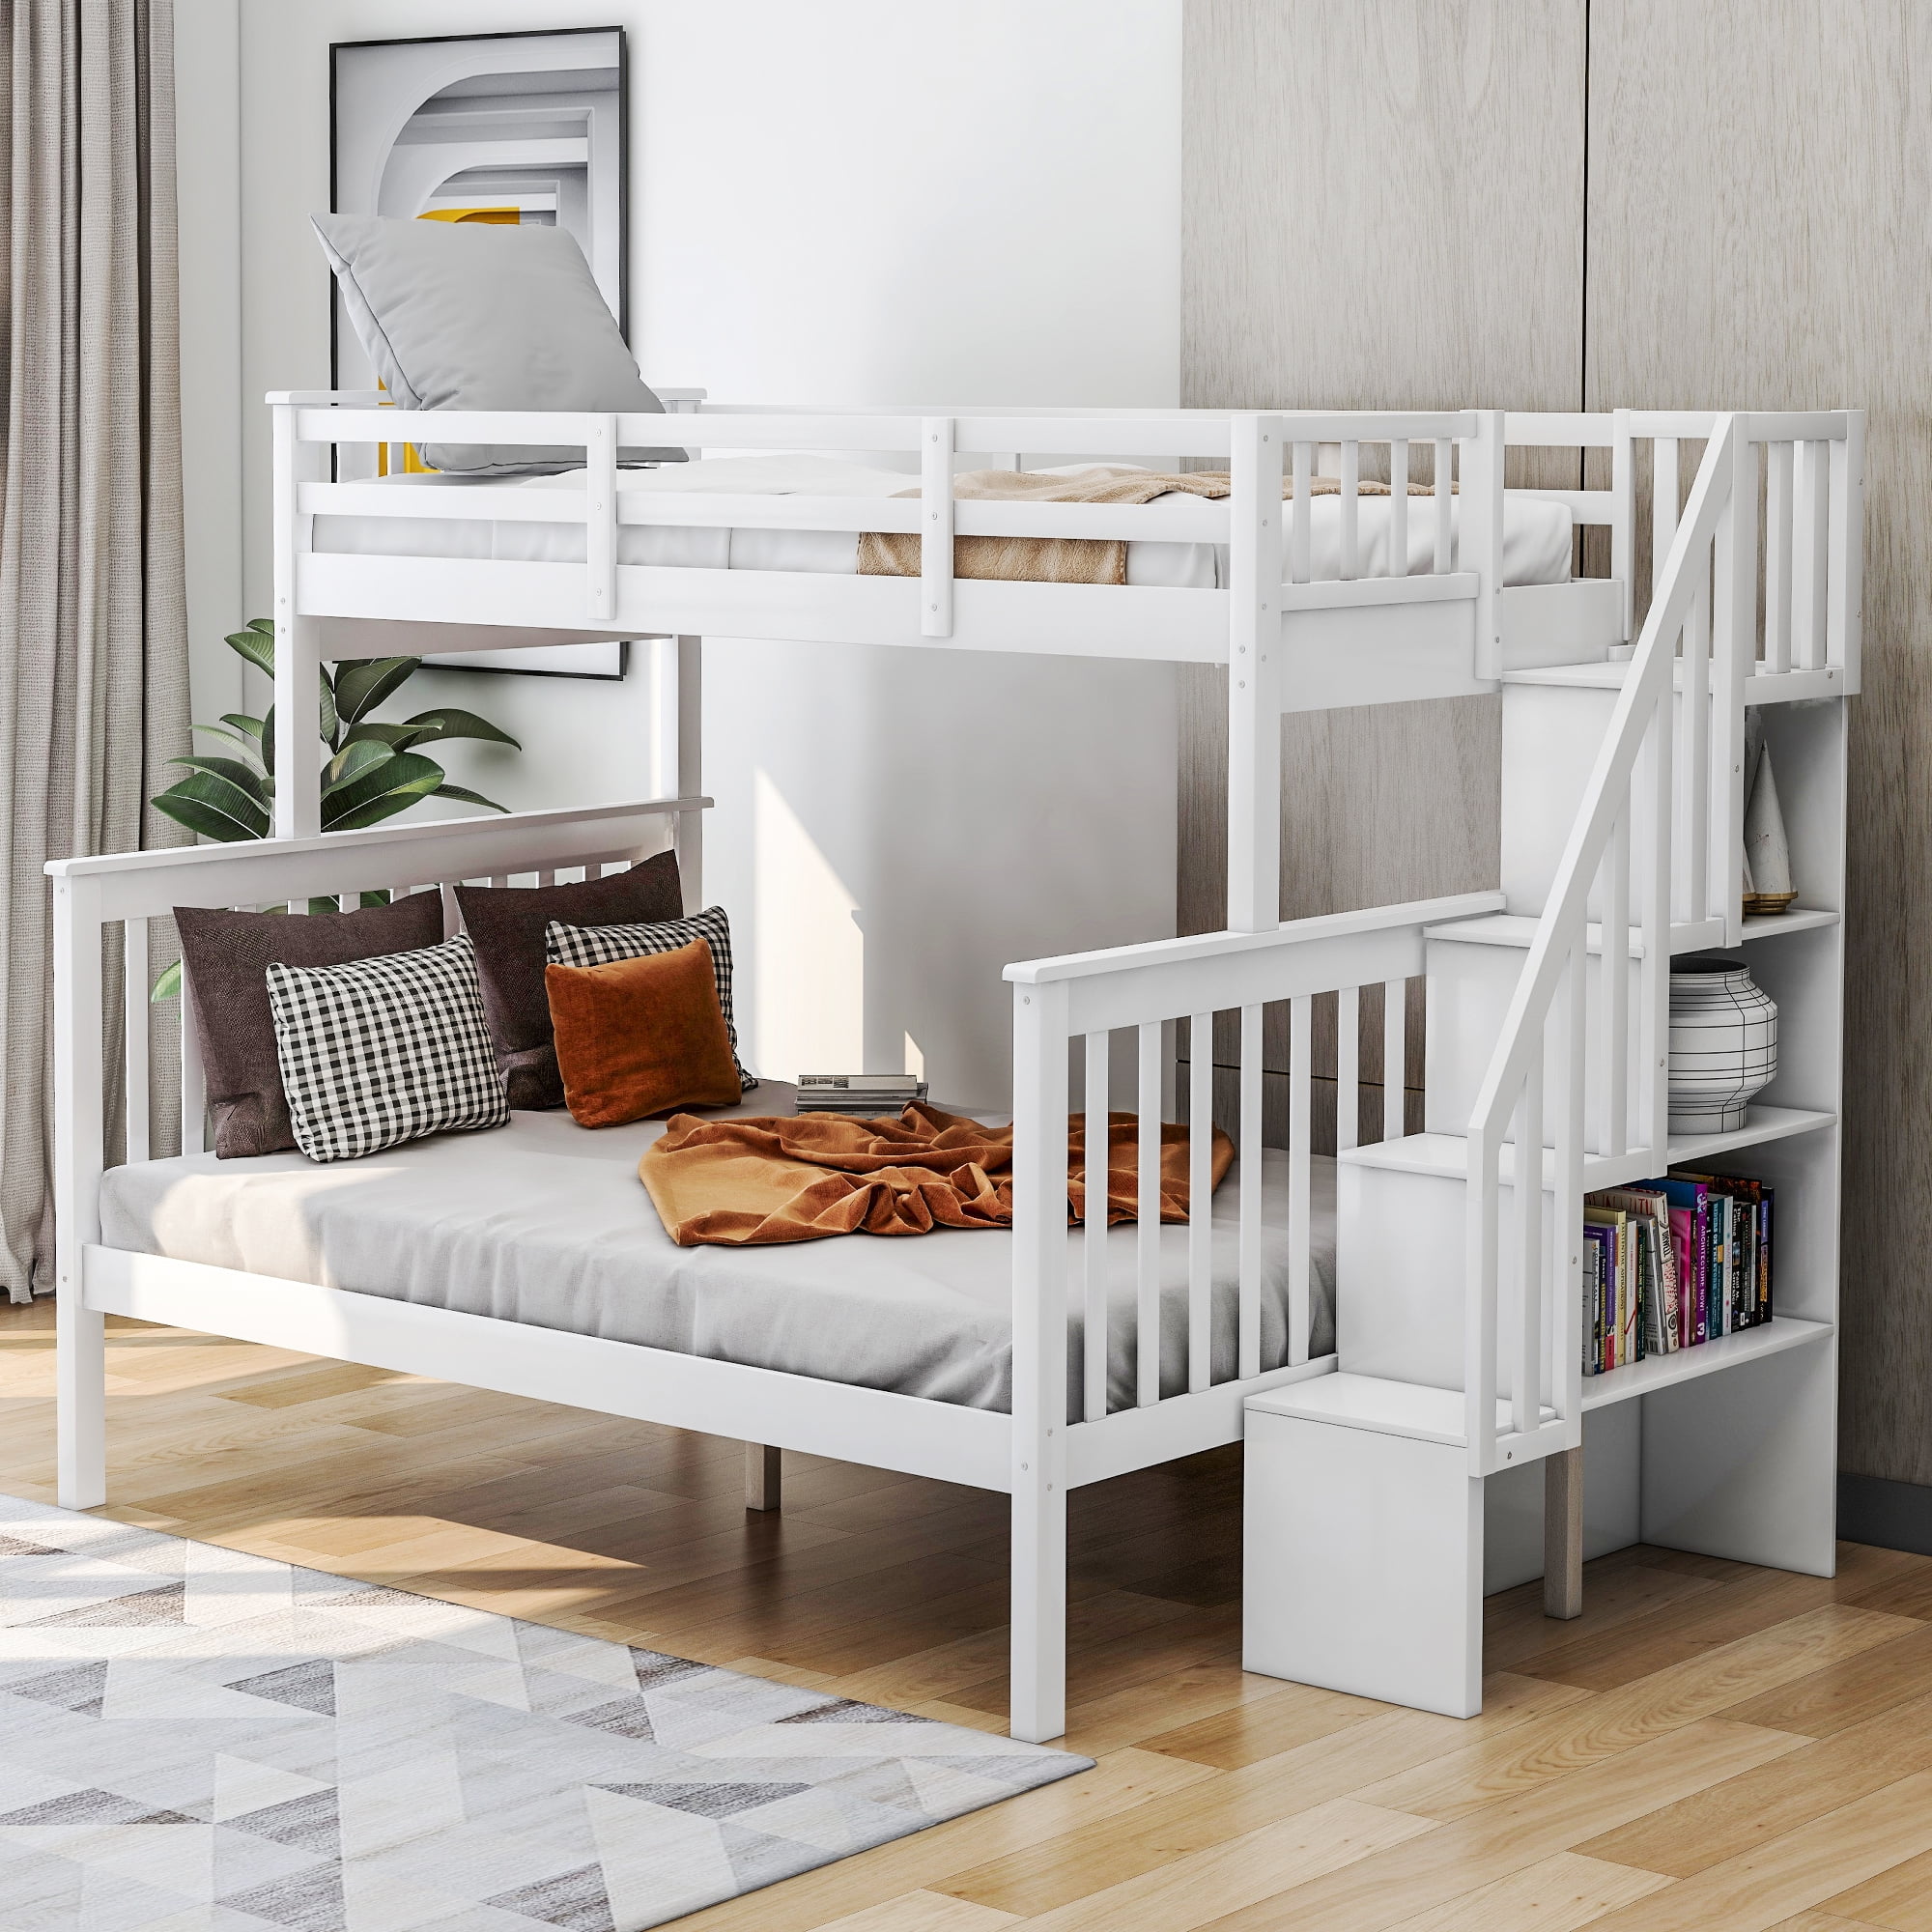 Kids Bunk Beds For Boys Girls Twin, Boy And Girl Bunk Beds